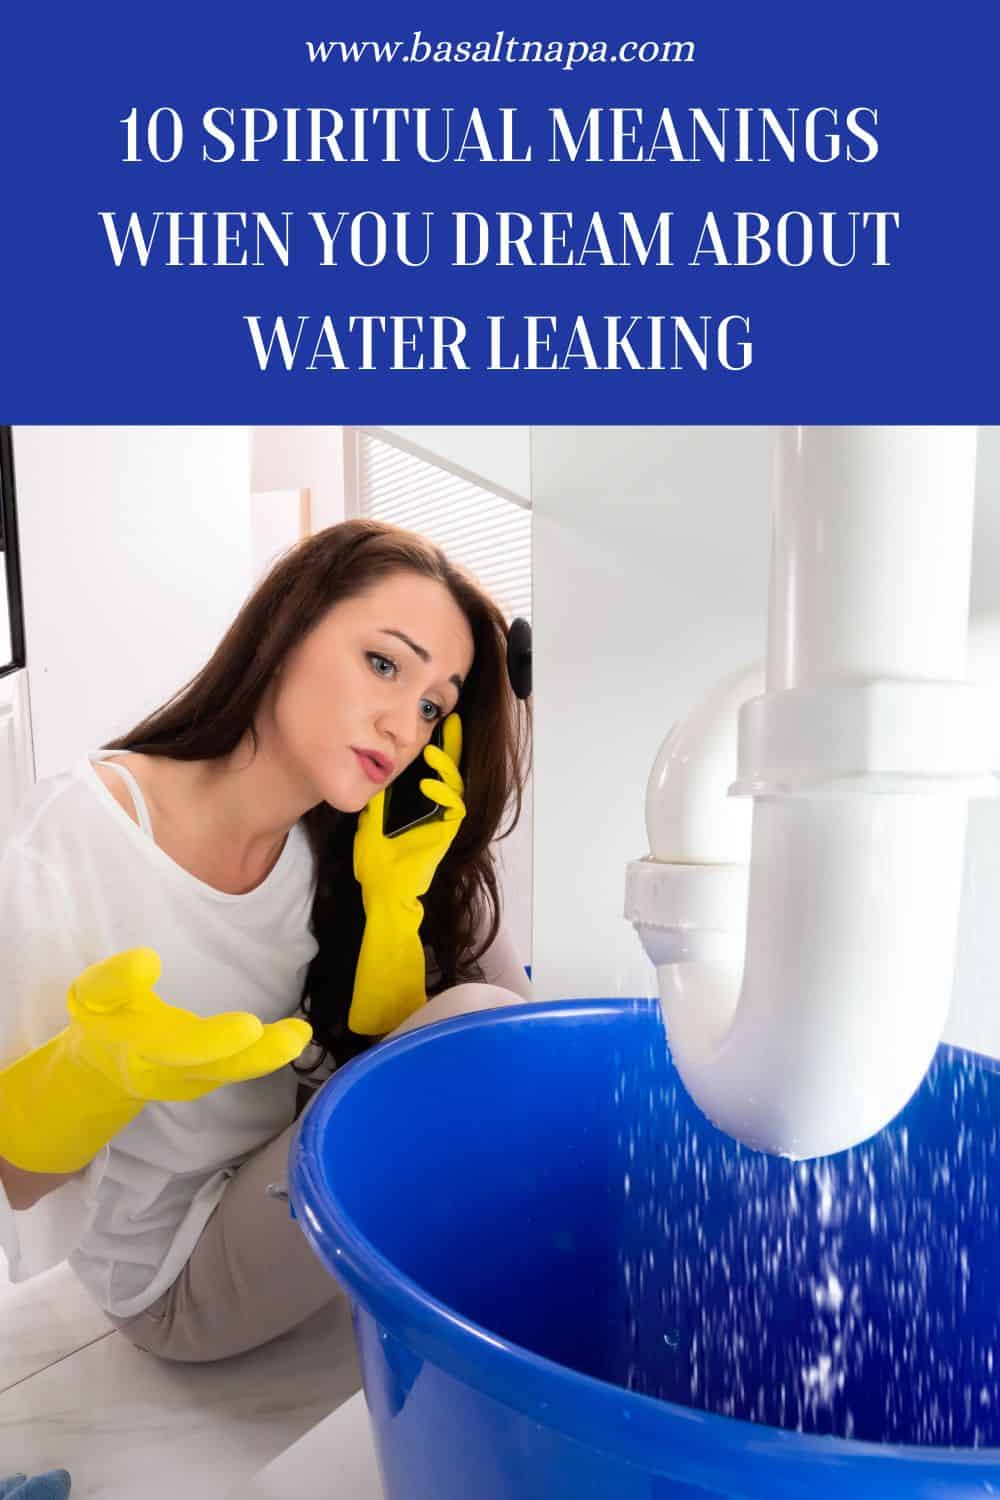 Symbolism Of Water Leaking In House Dreams